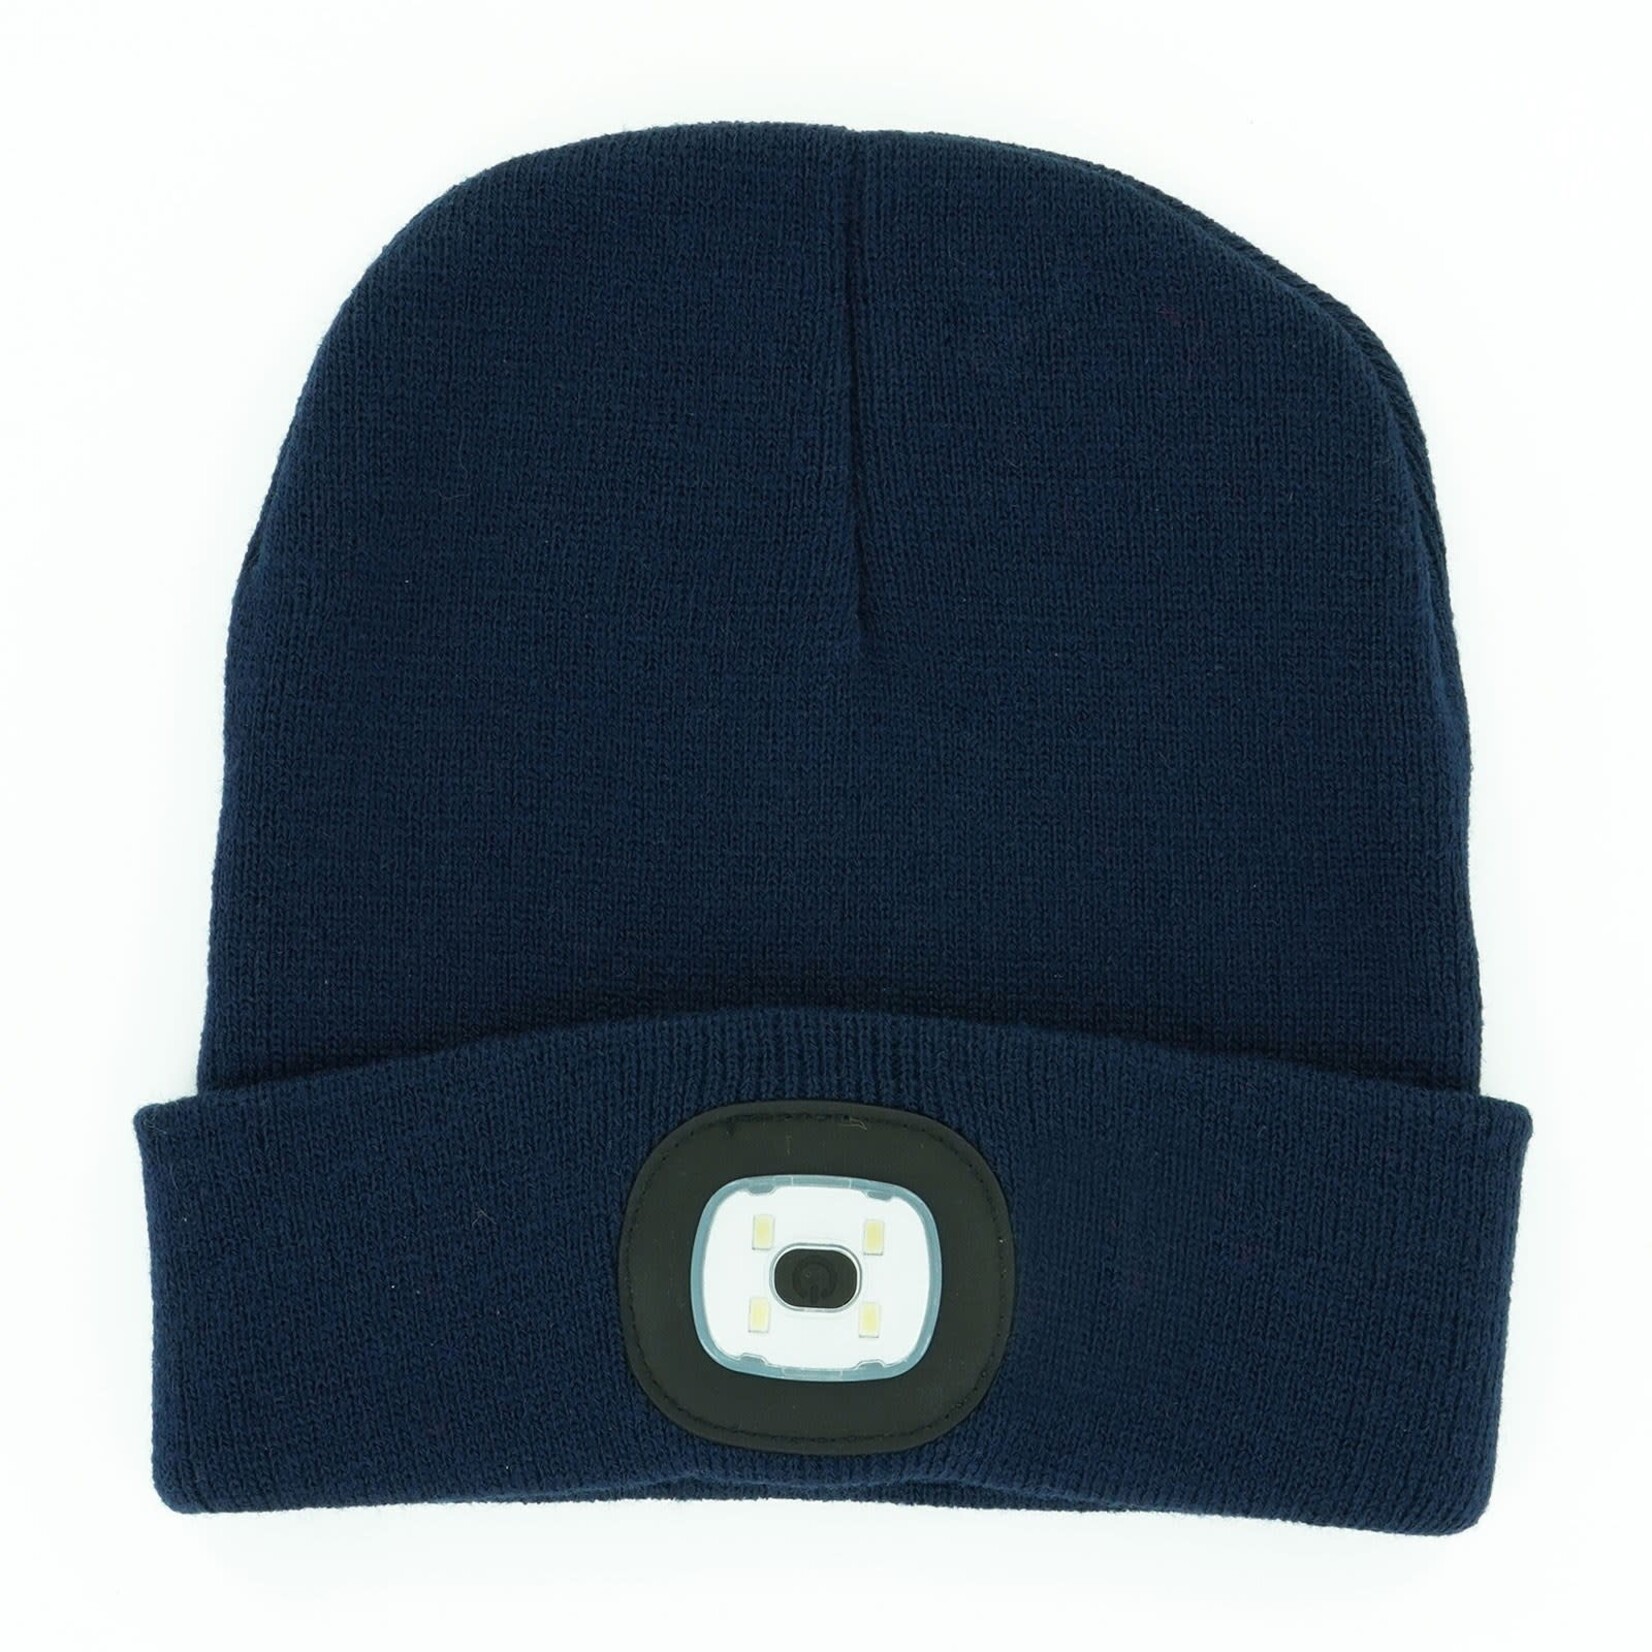 DM Merchandise Night Scope Rechargeable LED Beanie Navy